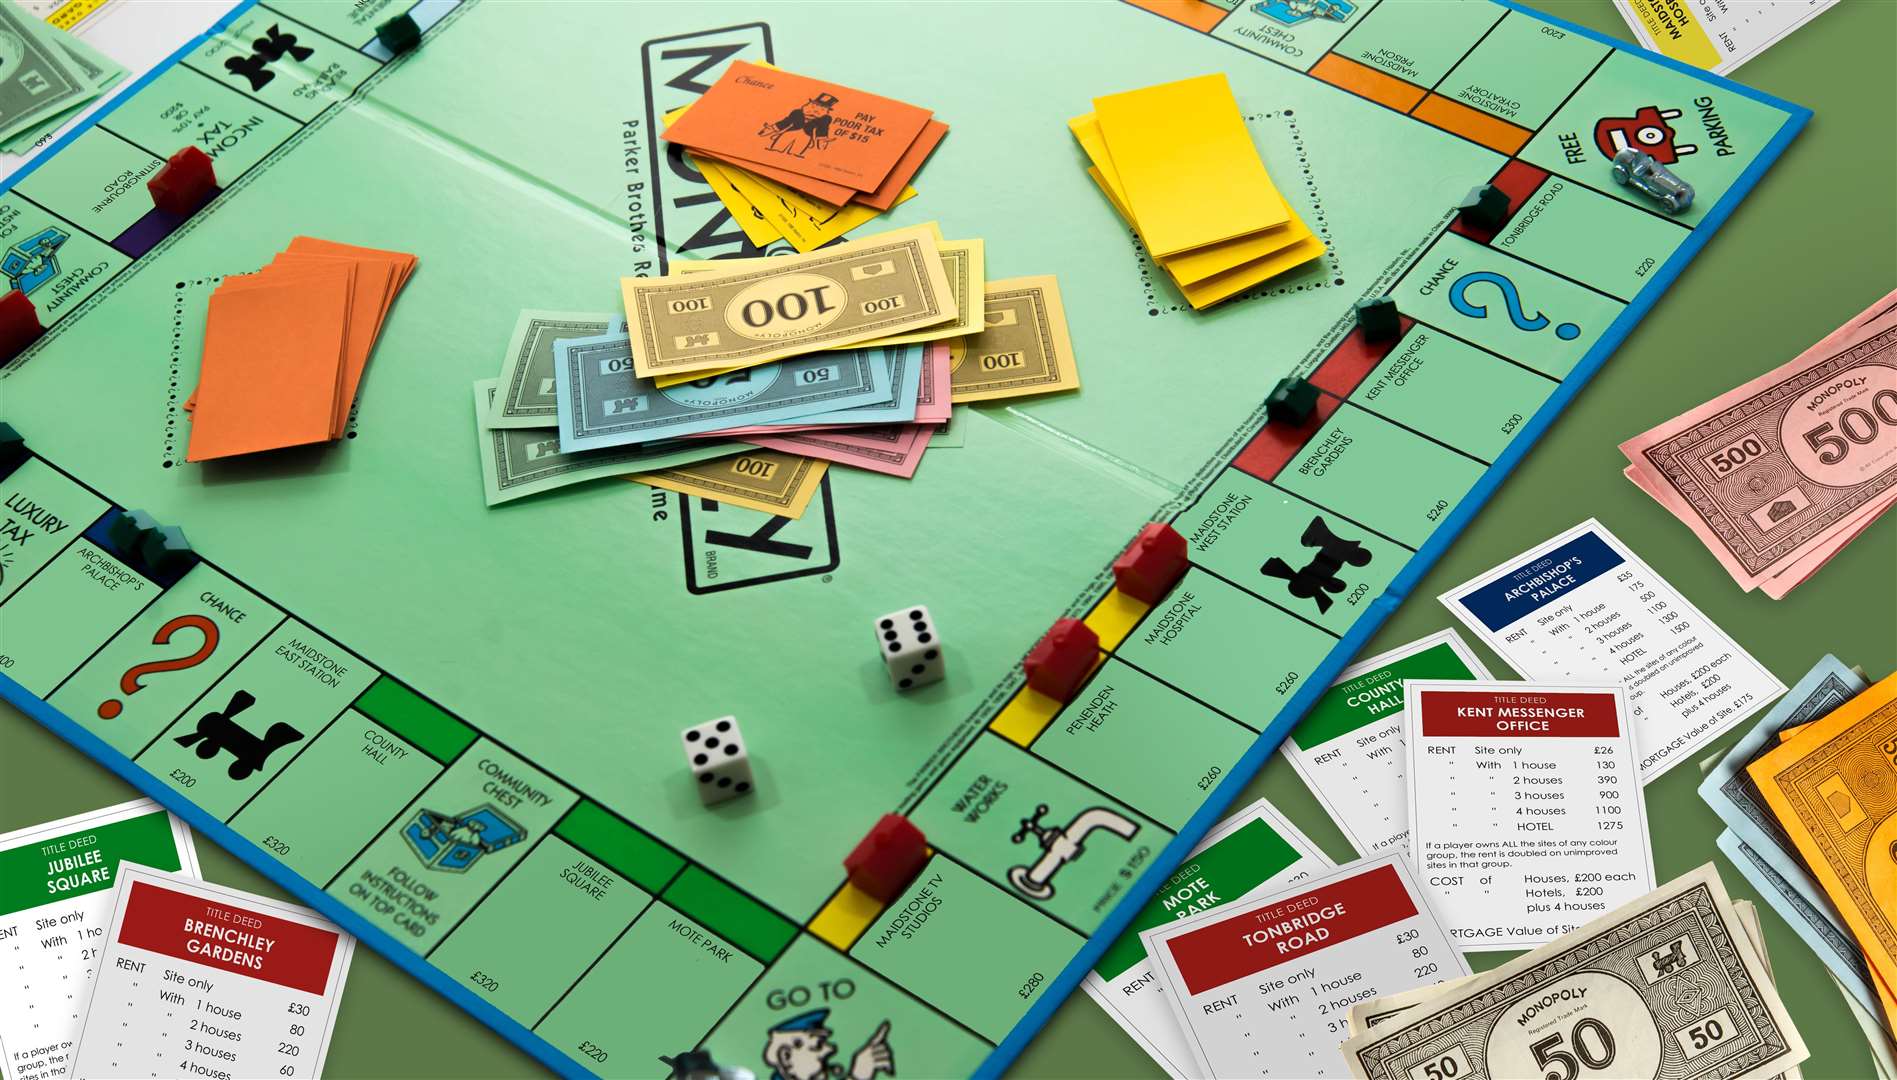 Local charities are to feature on the Maidstone edition of Monopoly